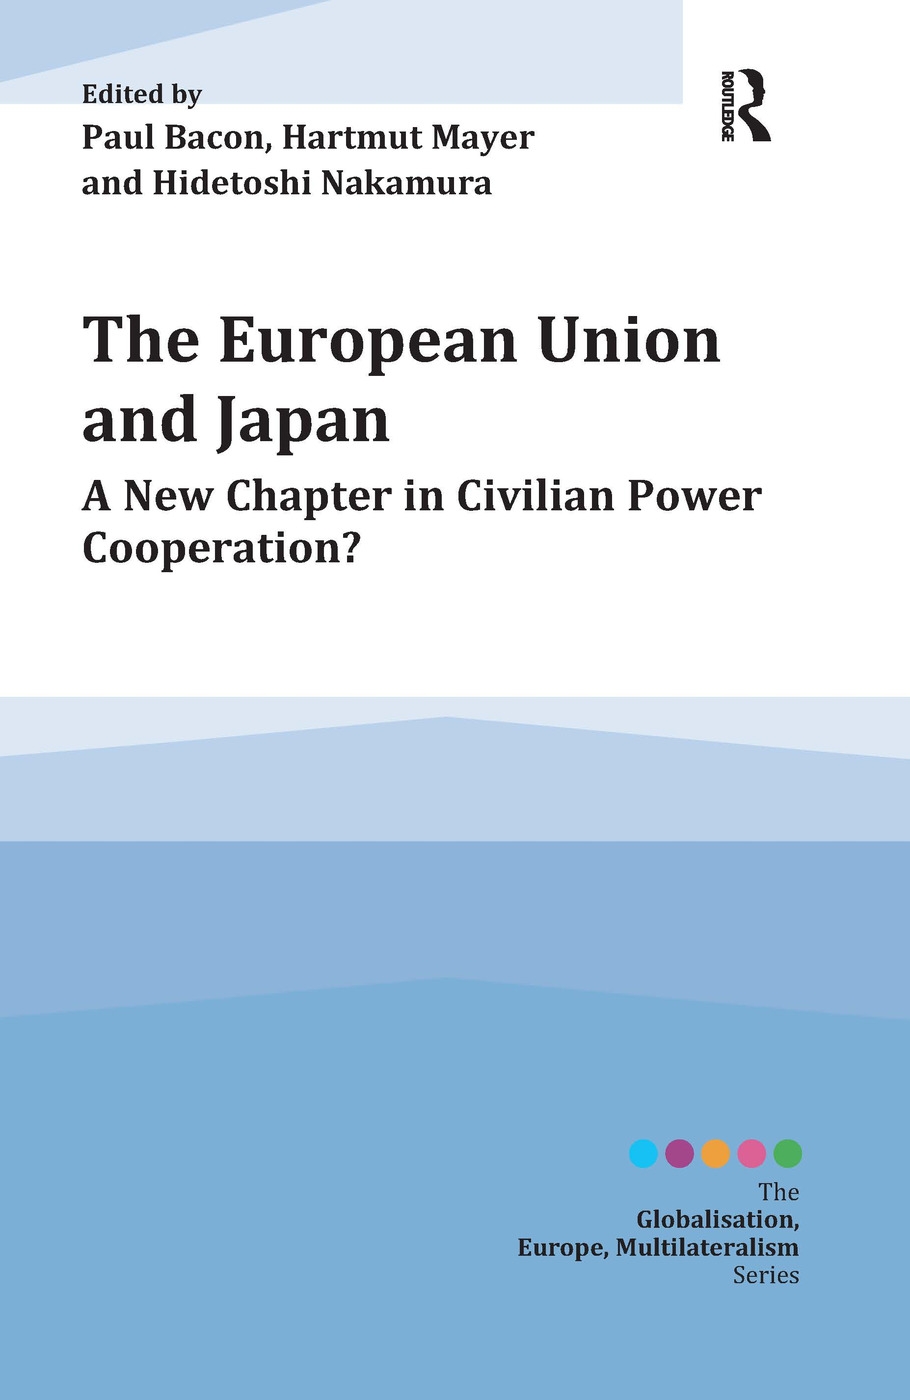 The European Union and Japan: A New Chapter in Civilian Power Cooperation? / Edited by Paul Bacon, Hartmut Mayer and Hidetoshi Nakamura